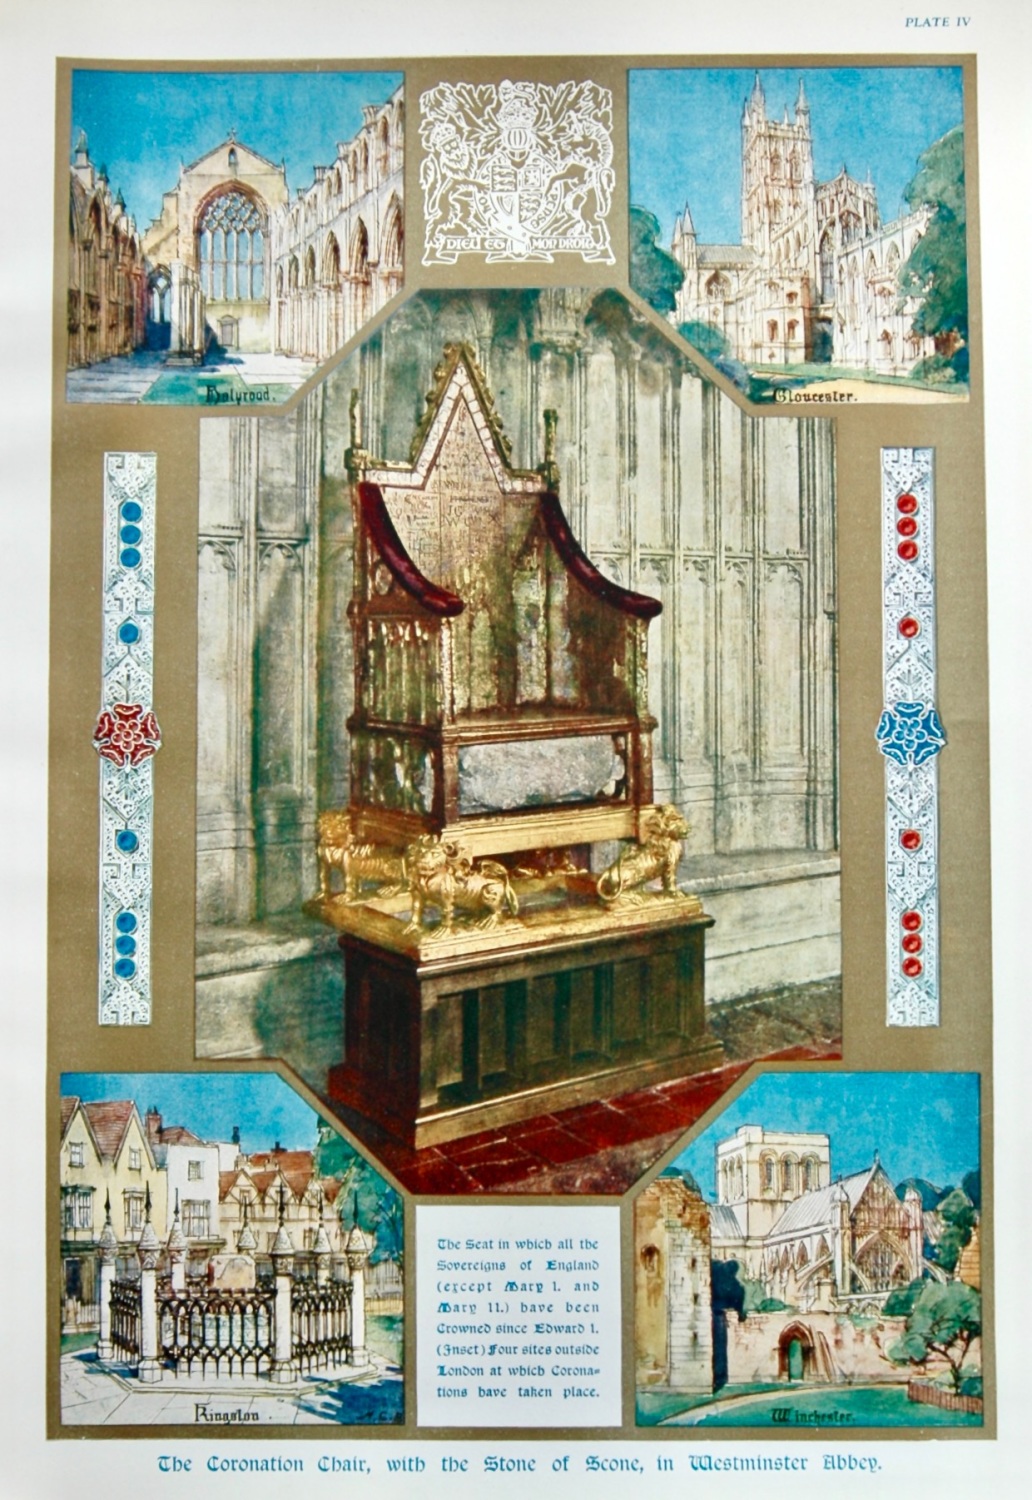 The Coronation Chair, with the Stone of Scone, in Westminster Abbey.  1953.